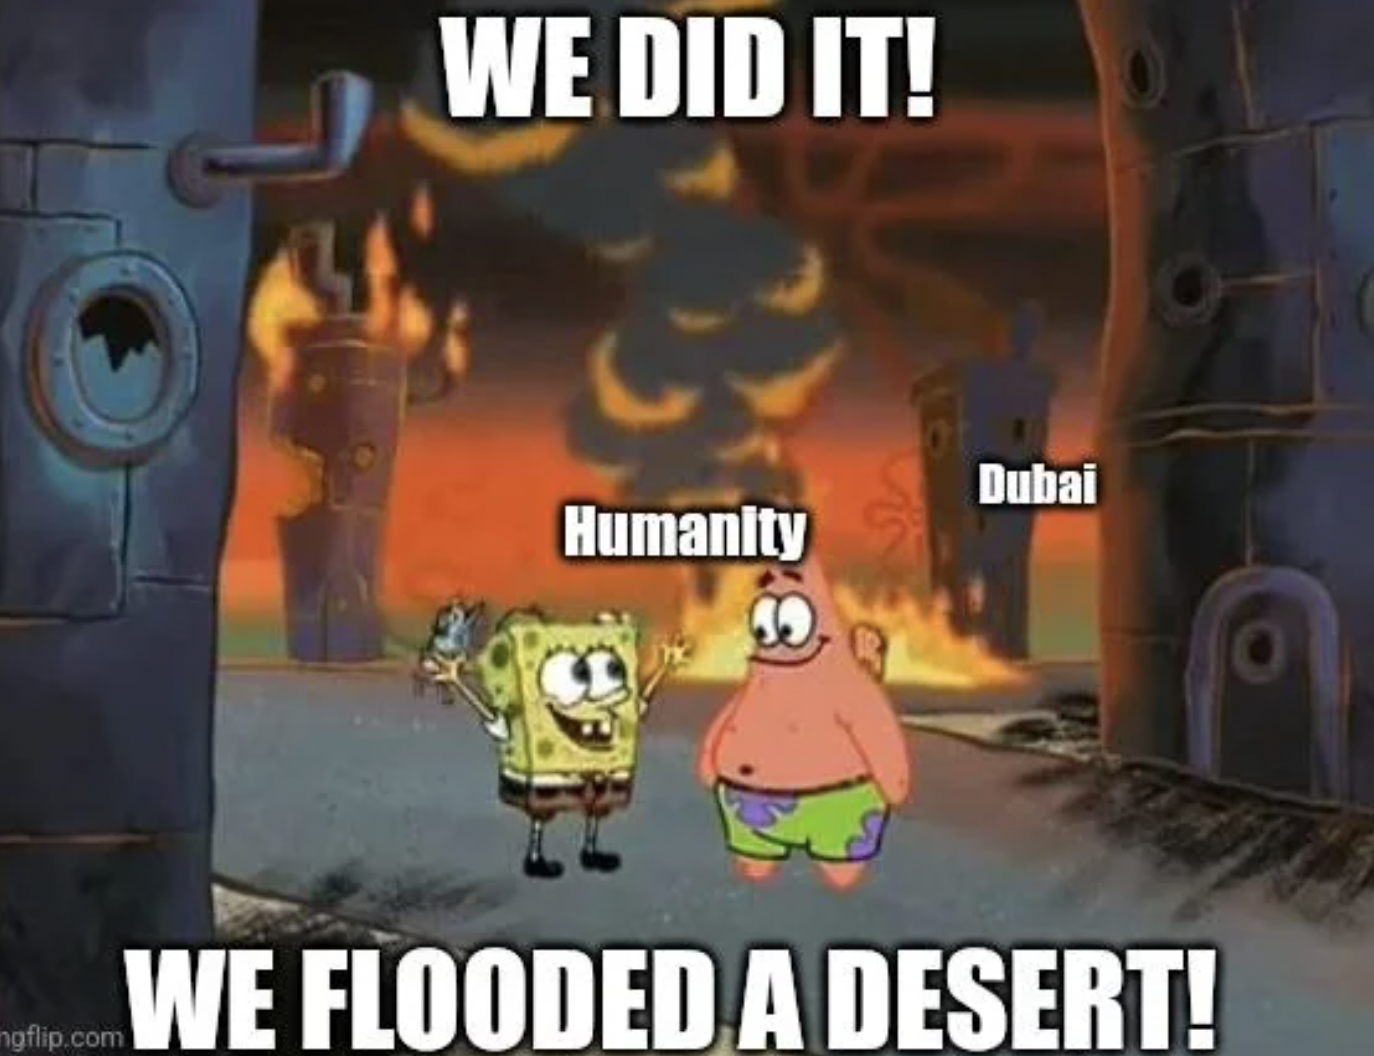 pc game - ngflip.com We Did It! Humanity Dubai We Flooded A Desert!